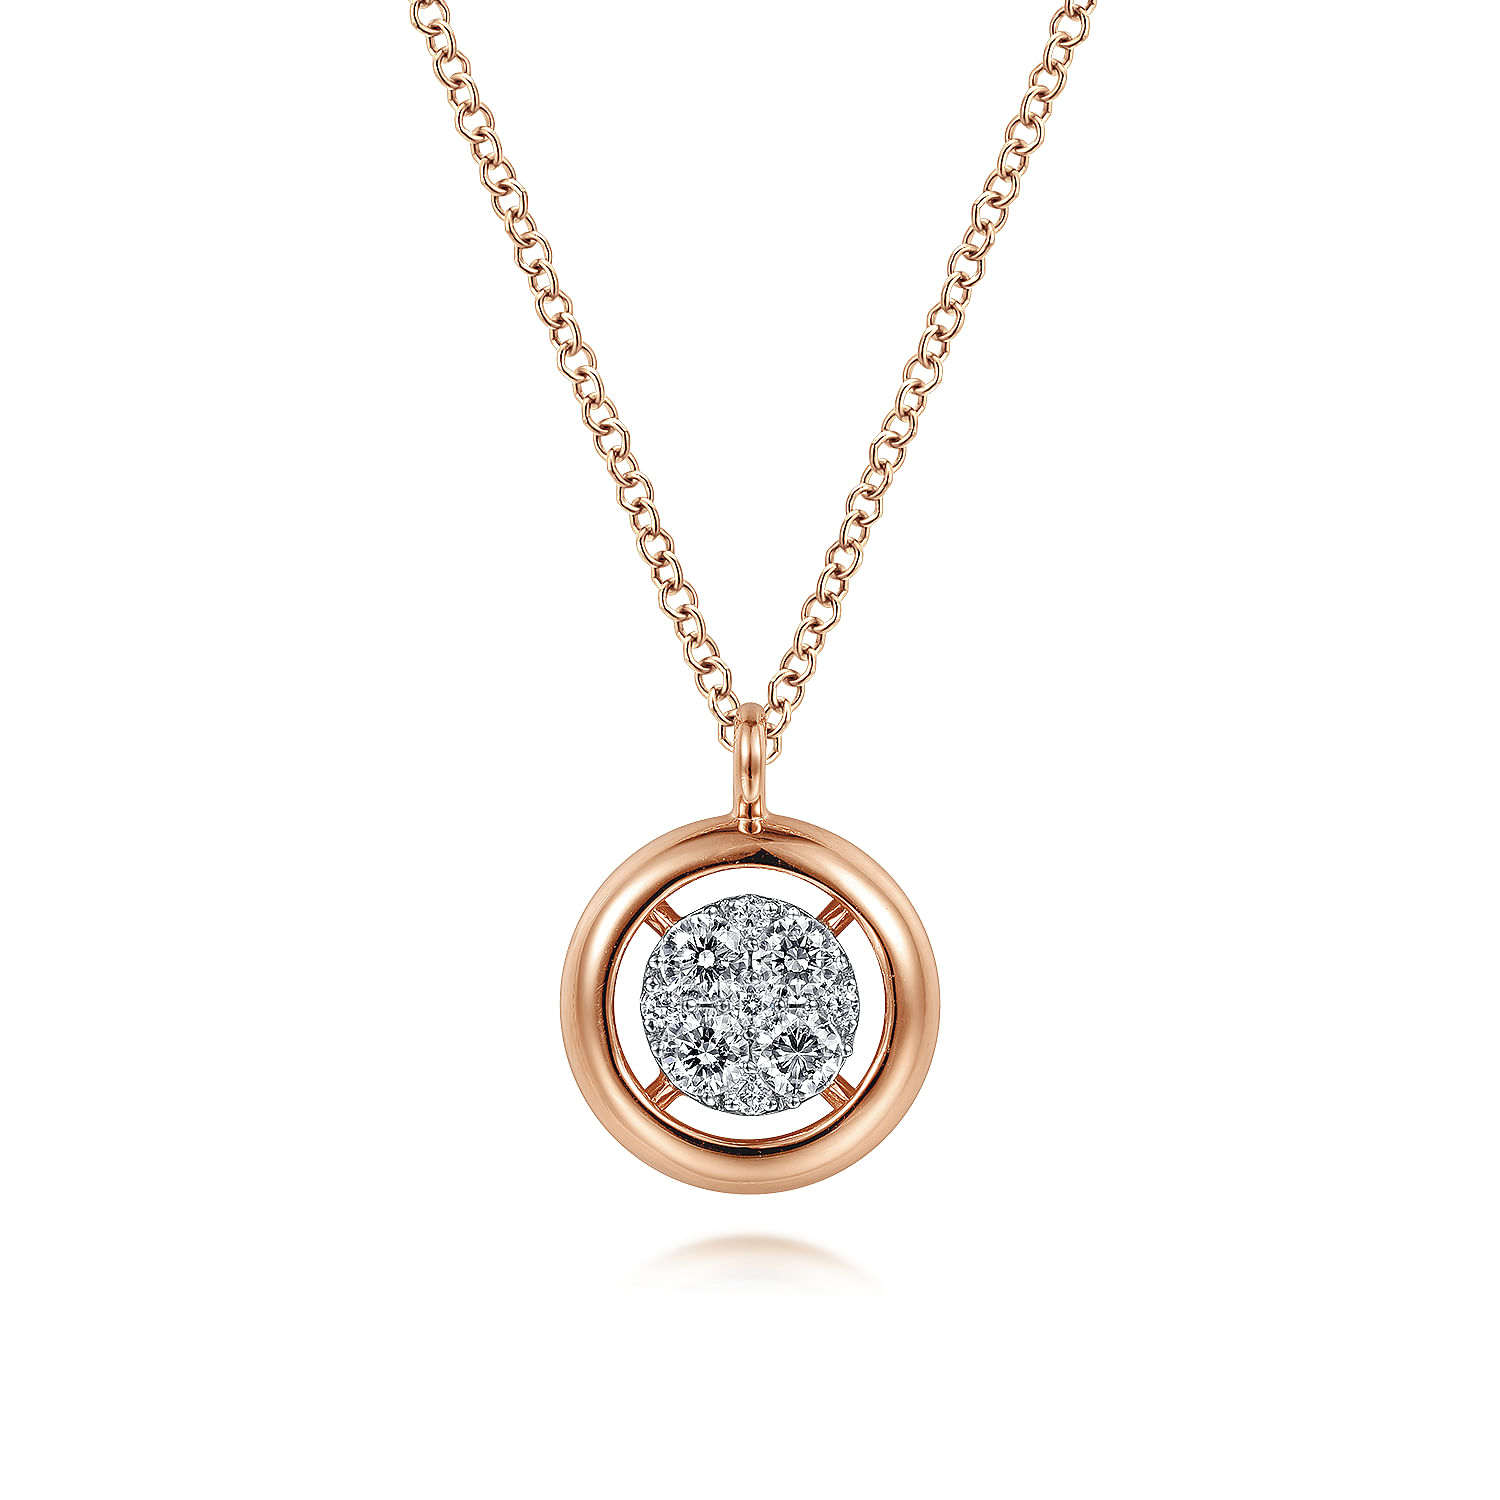 14K Rose Gold Round PavÒ Diamond Floating Pendant Necklace with Wide Border